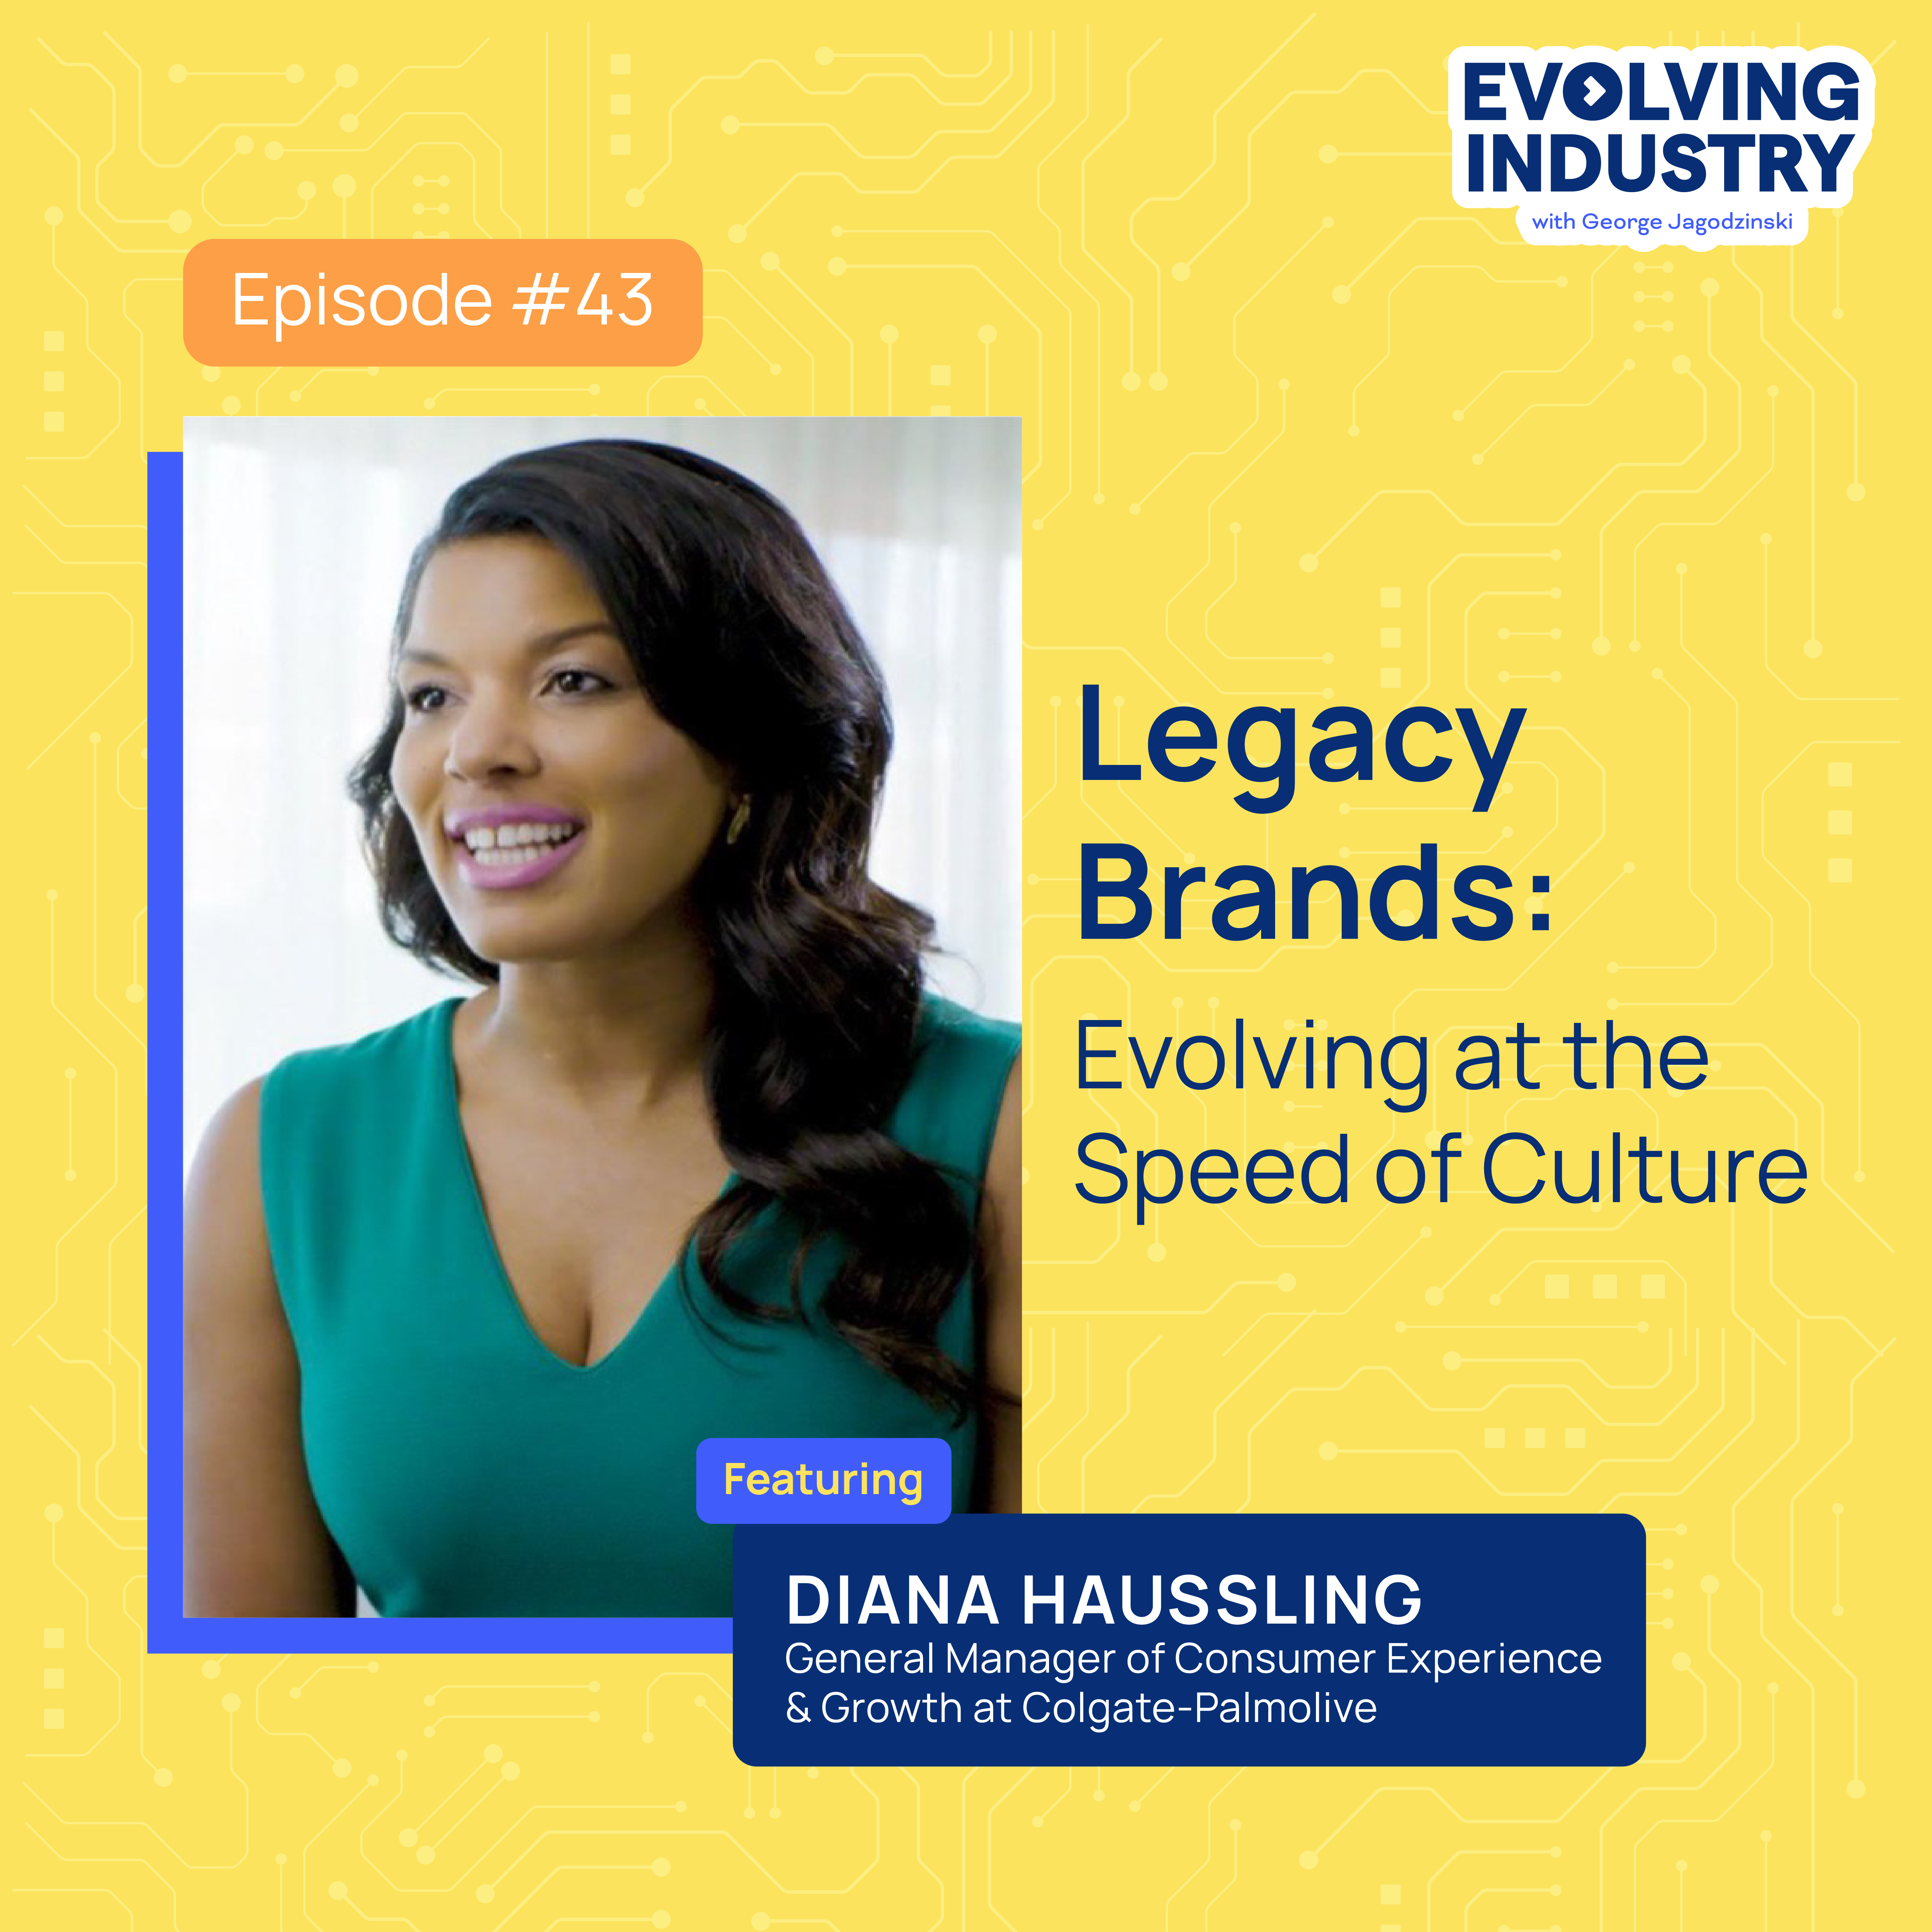 Legacy Brands: Evolving at the Speed of Culture